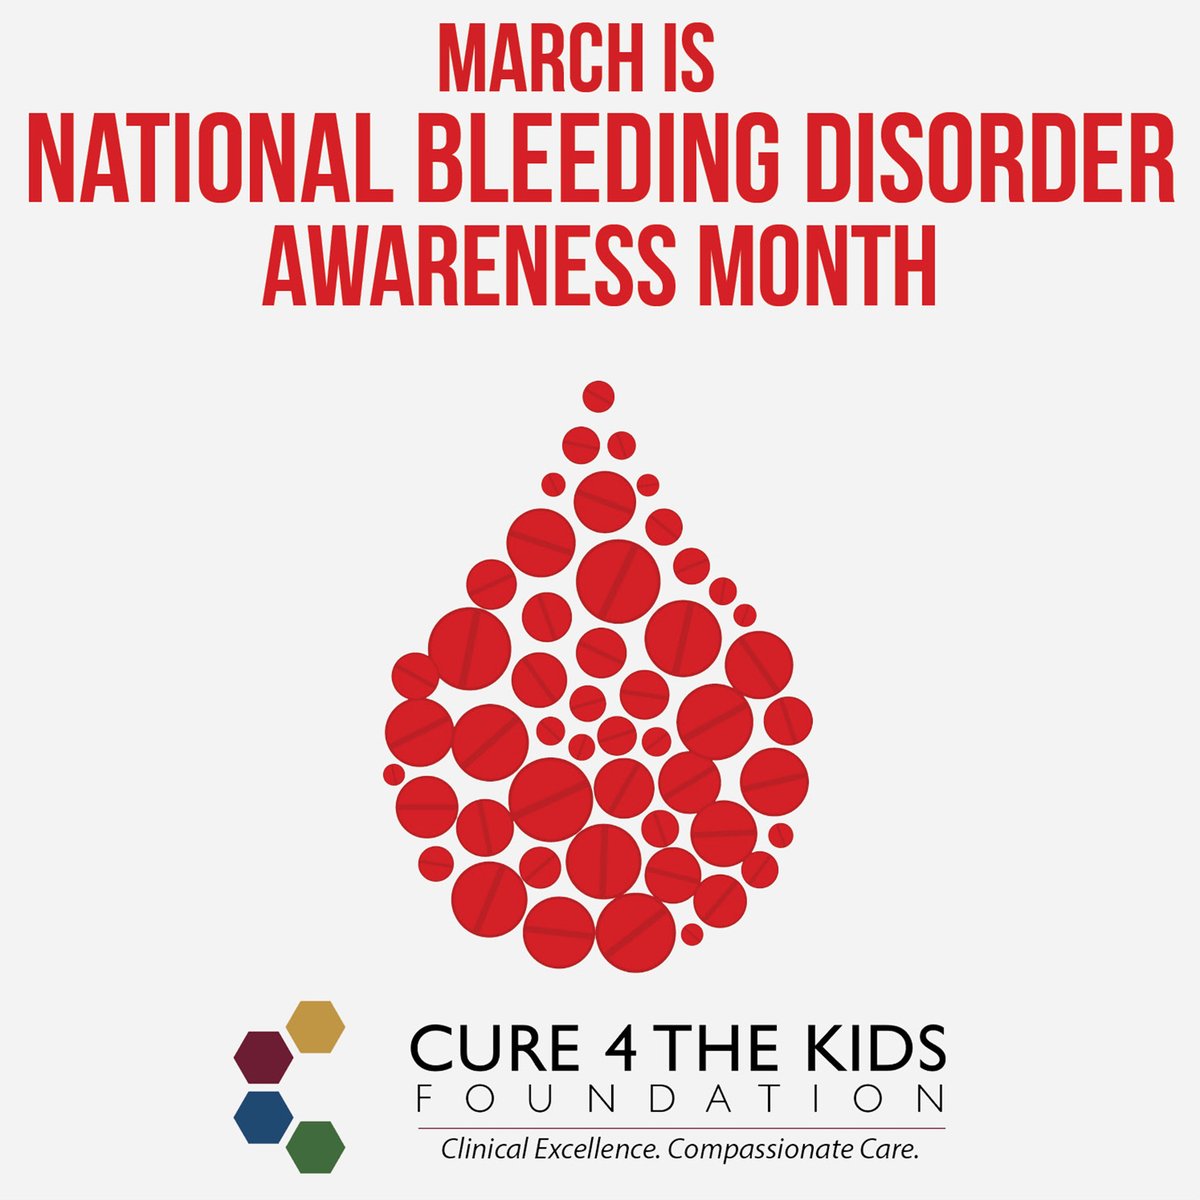 There are multiple types of bleeding disorders such as #Hemophilia and #vonWillebrandDisease. These are usually genetic but can be acquired. We will be sharing info about bleeding disorders all month long for #NationalBleedingDisorderAwarenessMonth.  #Cure4TheKidsFoundation